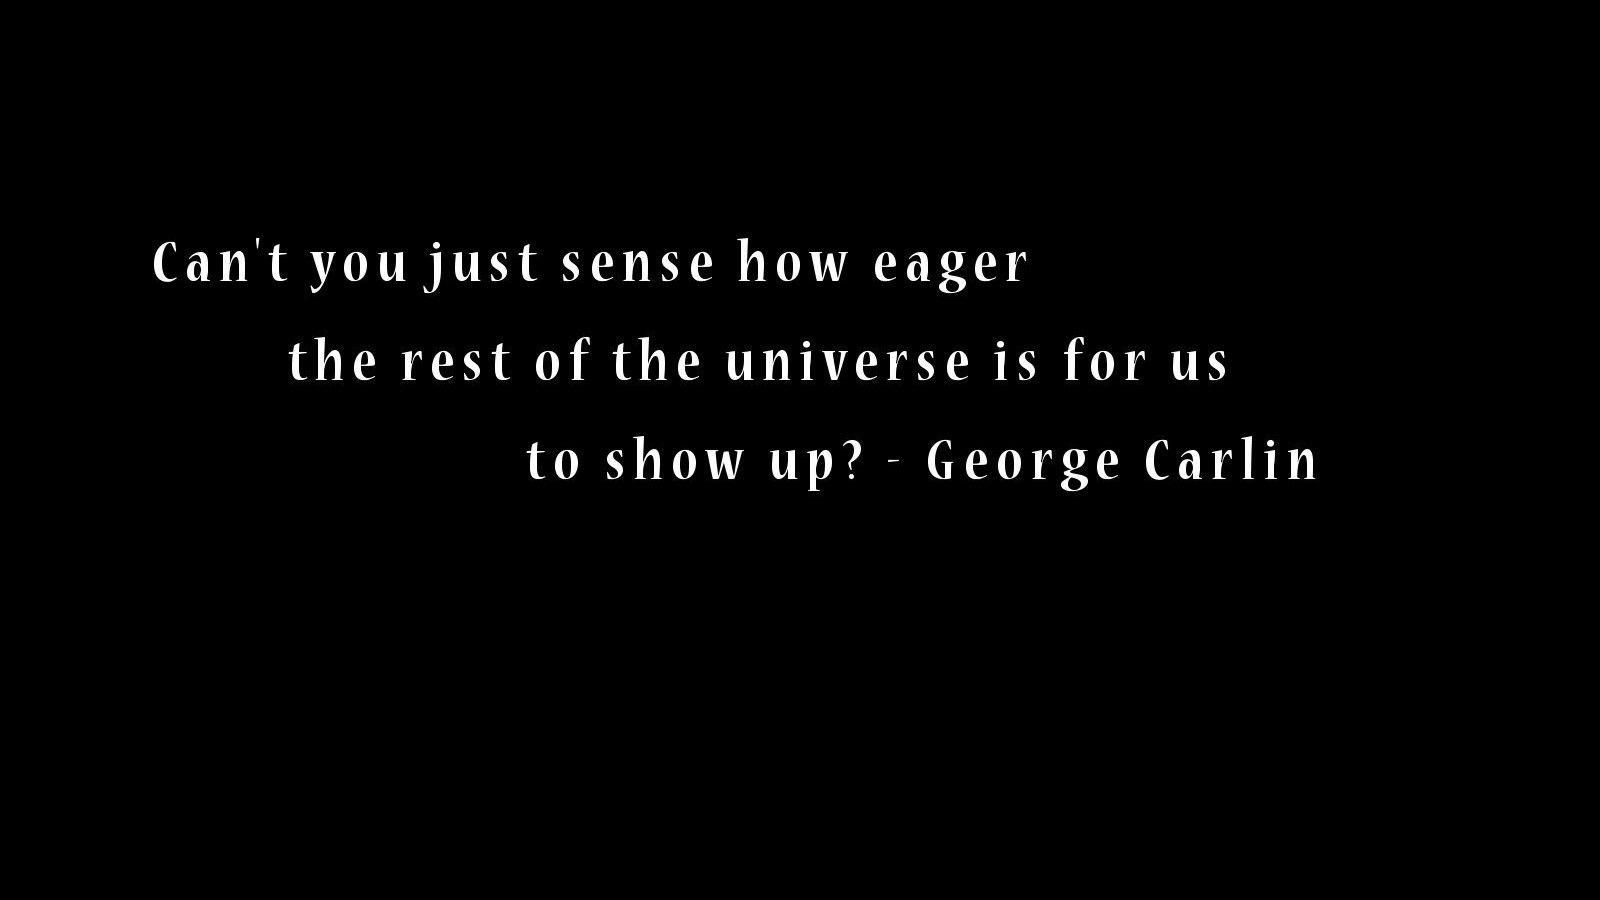 Minimalistic text quotes george carlin black background only